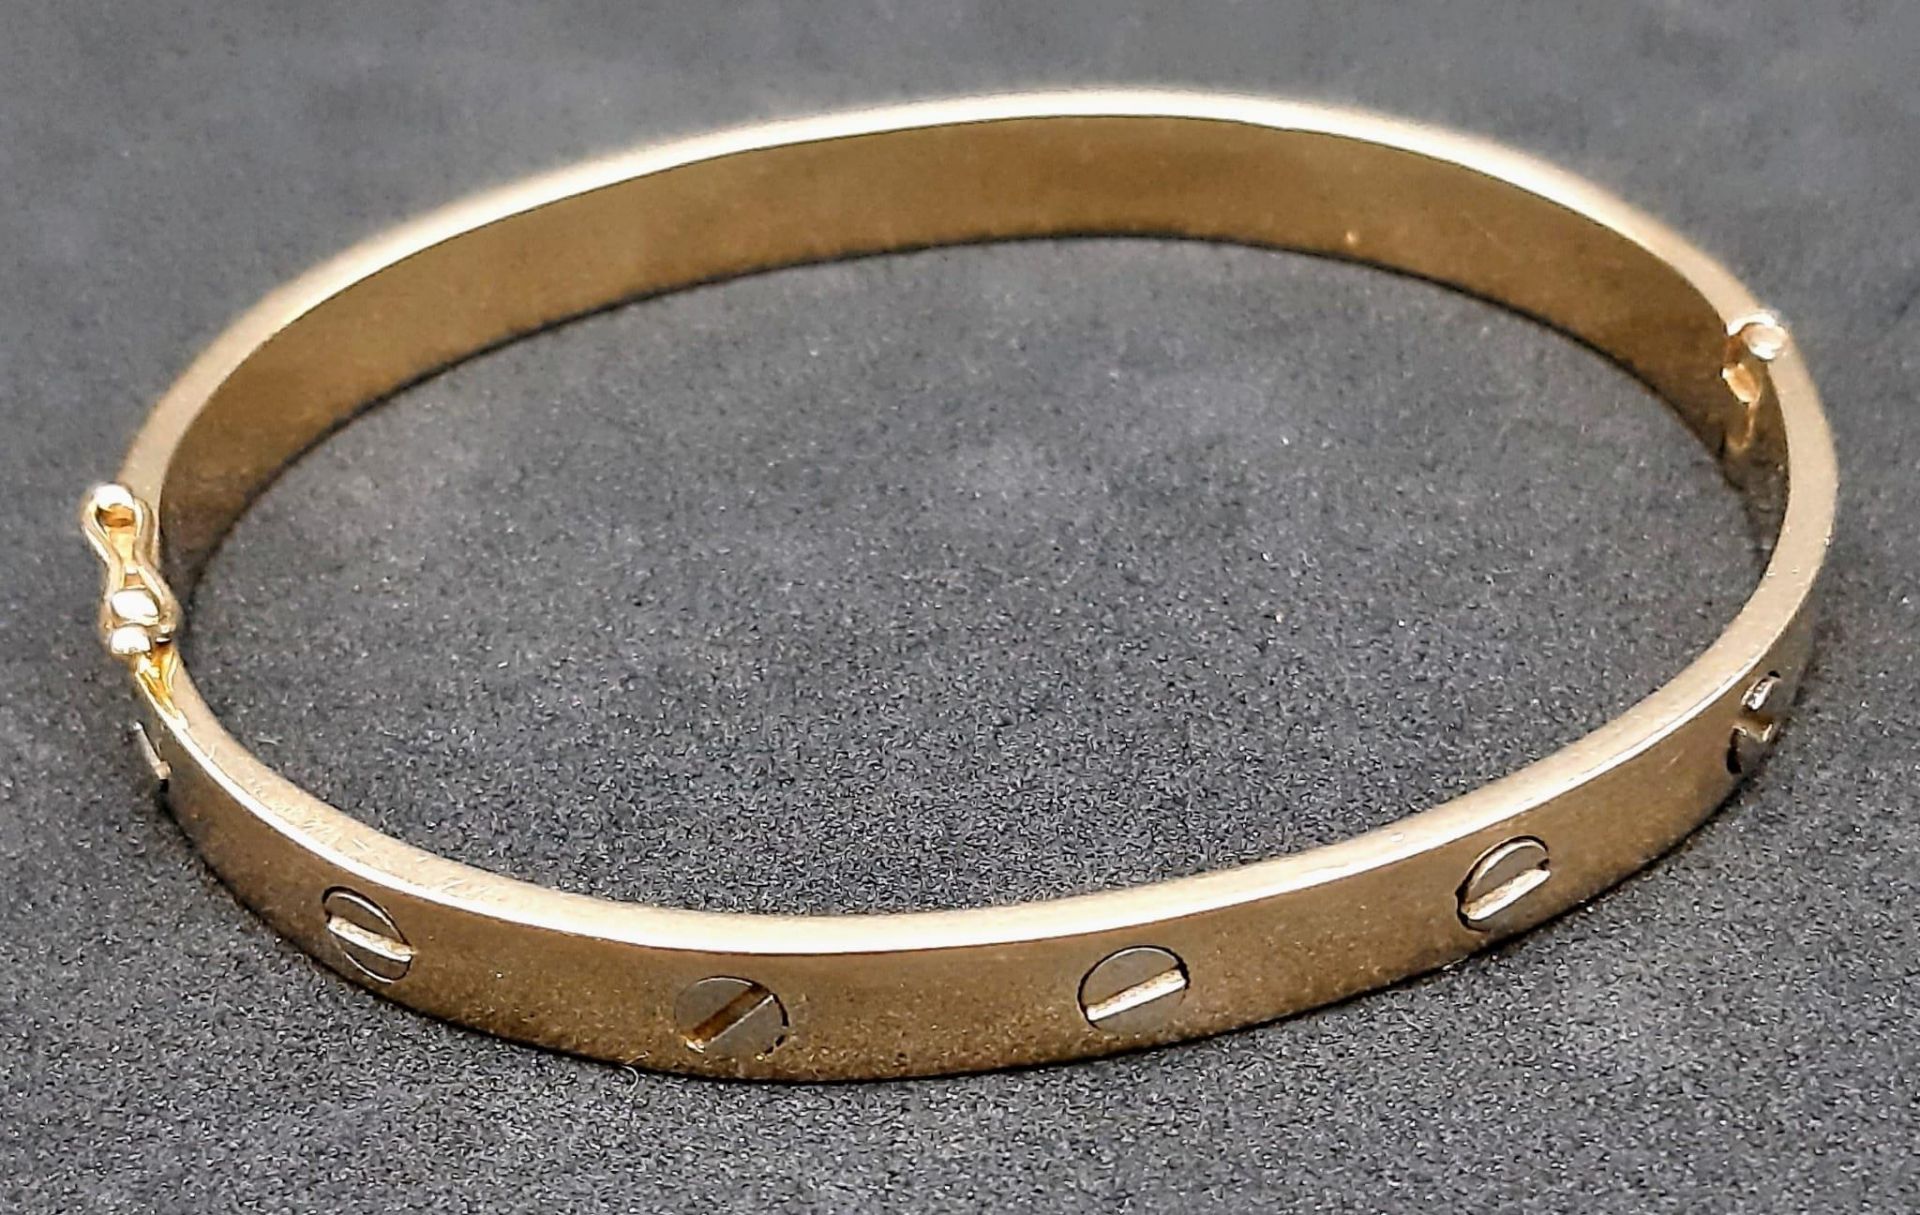 A 14K Yellow Gold Cartier-Style Bangle. Clip-open design for easy access. 62mm inner diameter. 22.